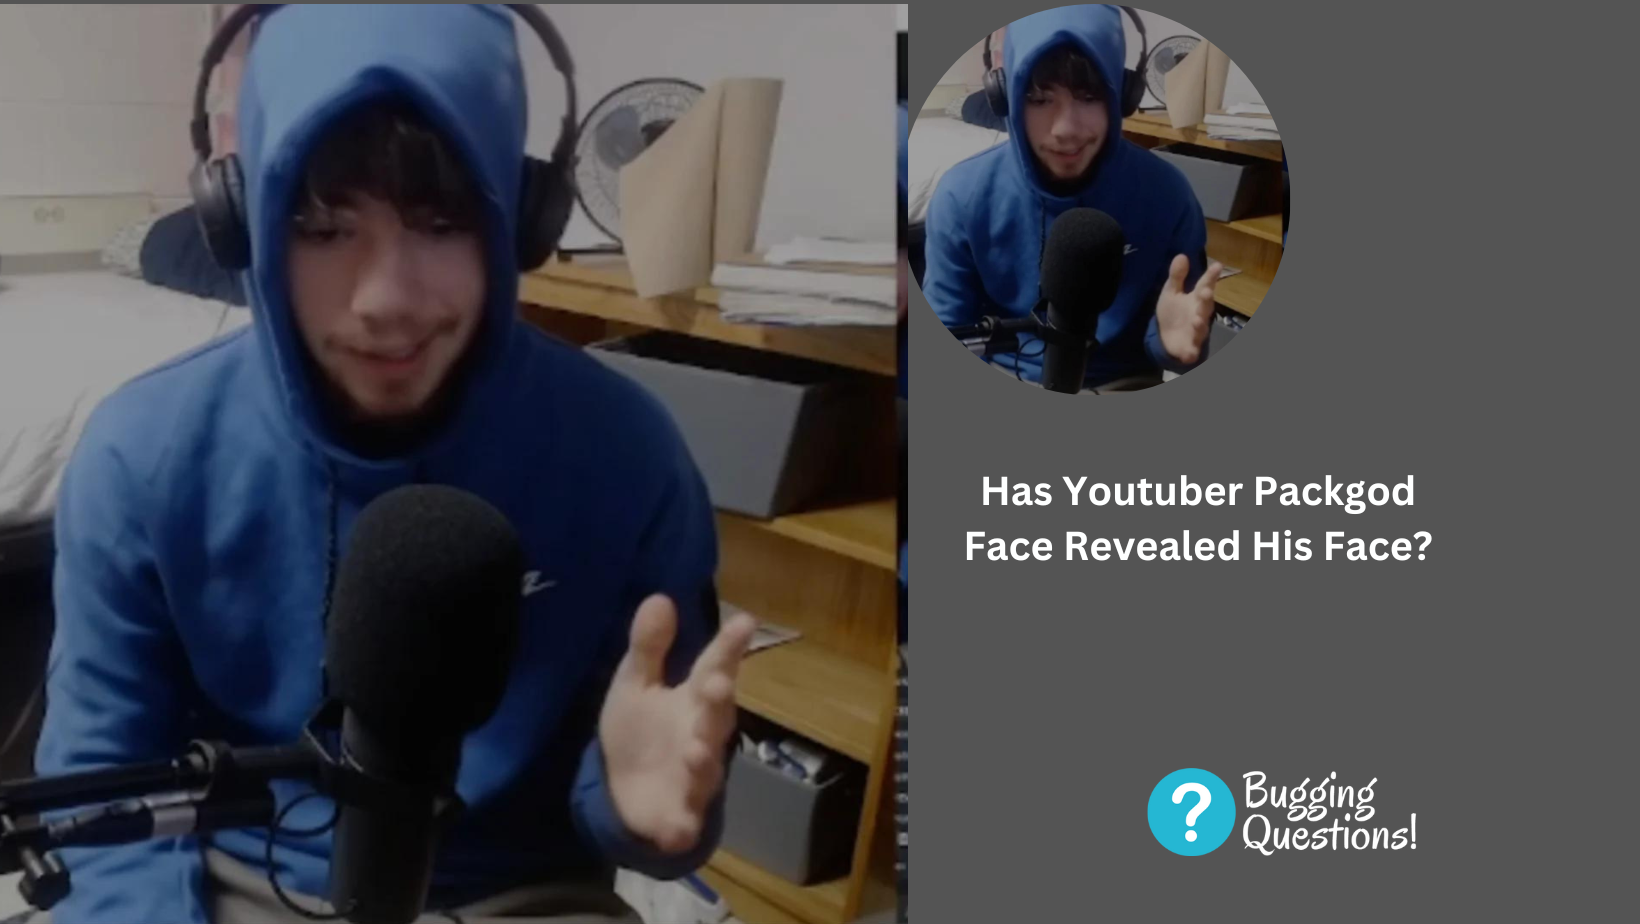 Has Youtuber Packgod Face Revealed His Face?